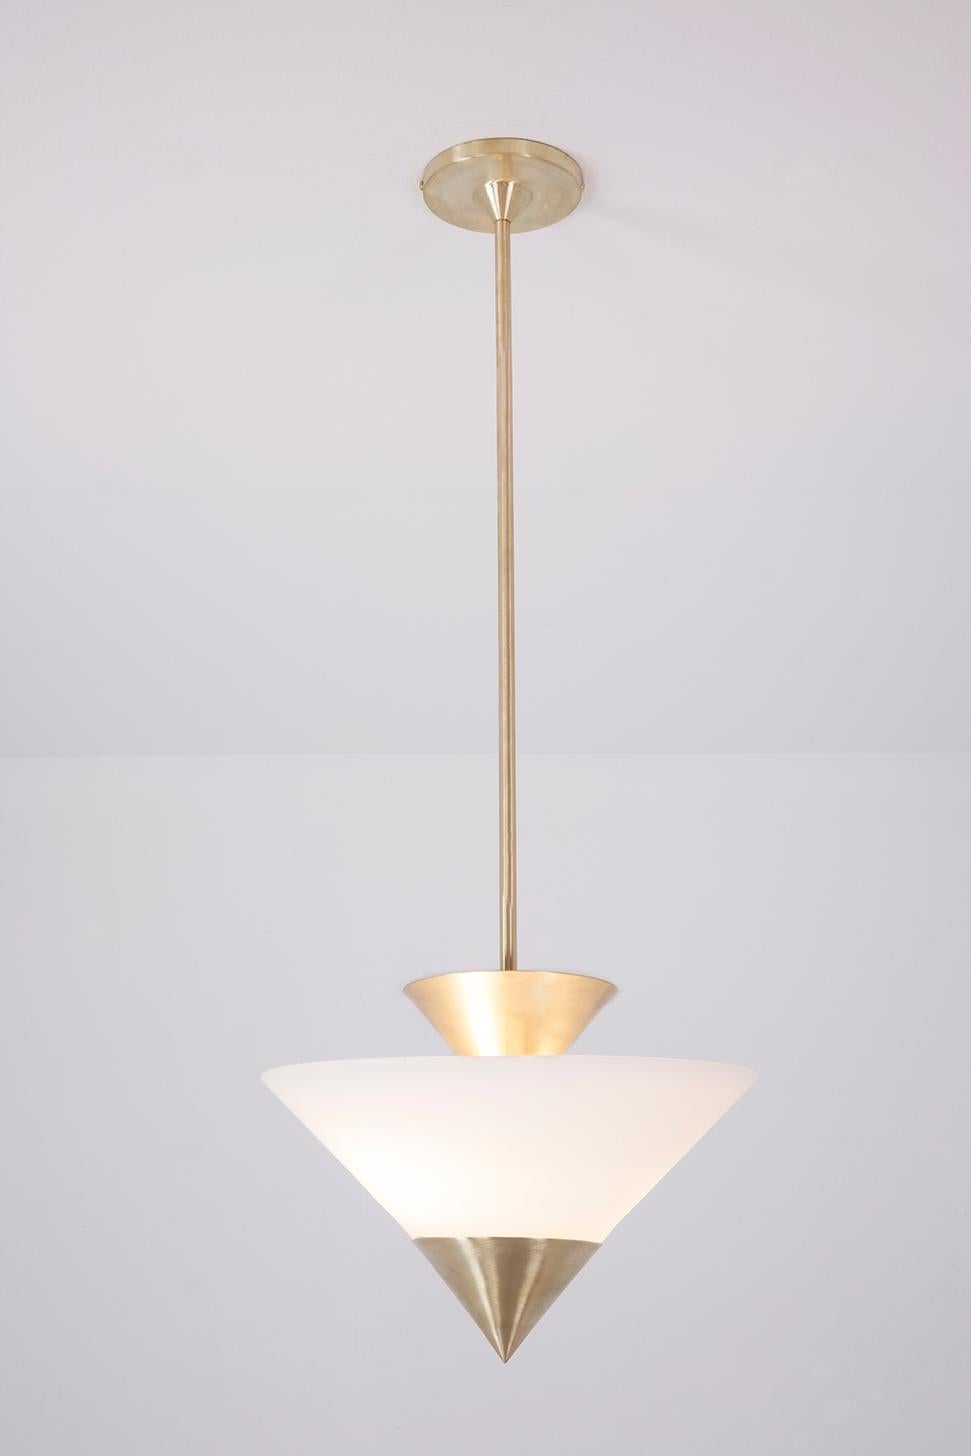 Measures: W 14in (35.5 cm) x D 14in (35.5 cm) x H 36in (91.5 cm)
Canopy: Dia 6in (15.25 cm)

The Zé pendant is inspired by the geometric elements of Art Deco. Finish options for the brass stem, canopy, and cone are either brass or matte black. The